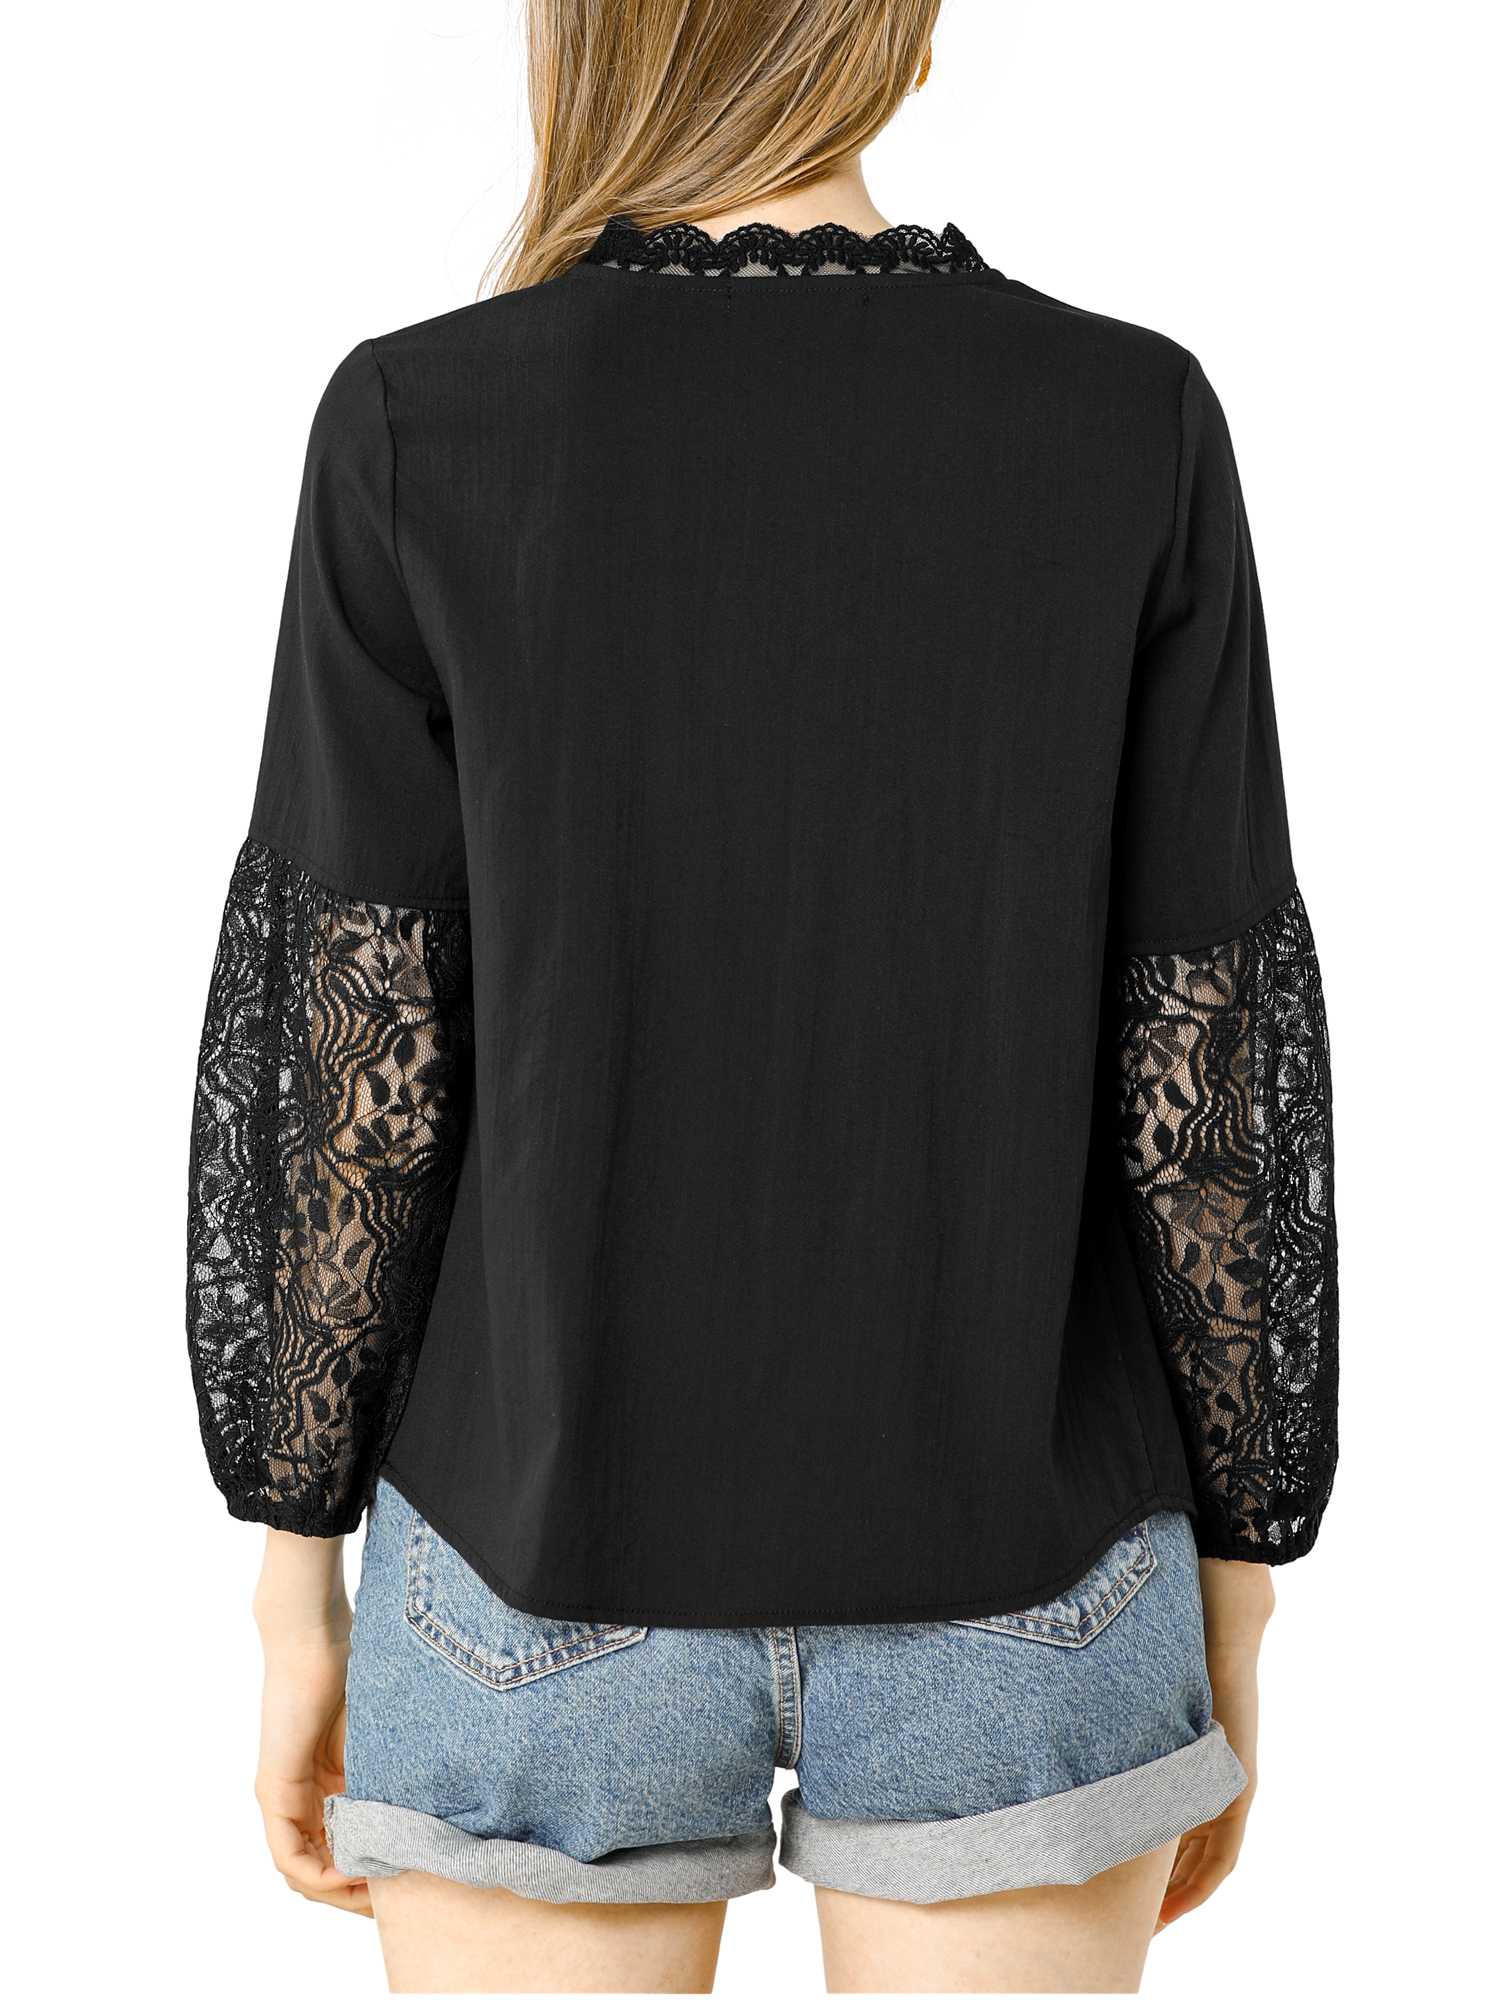 Women's Lace Floral Peasant Patchwork Long Puff Sleeve V Neck Blouse - image 3 of 6